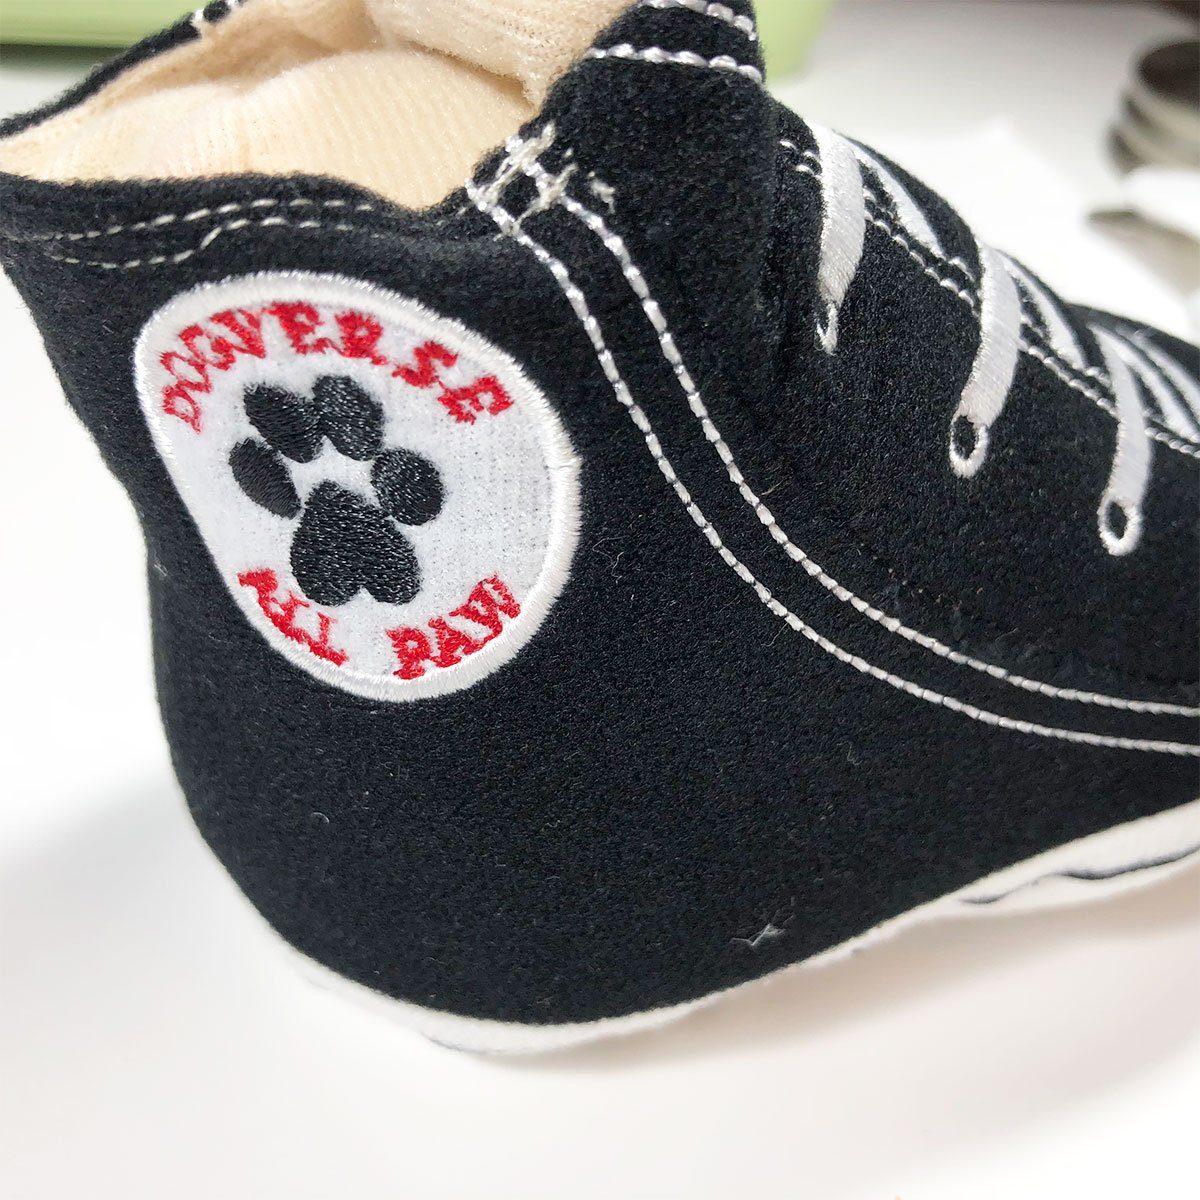 Dogverse All Paw Sneaker Dog Toy | Pawlicious & Company